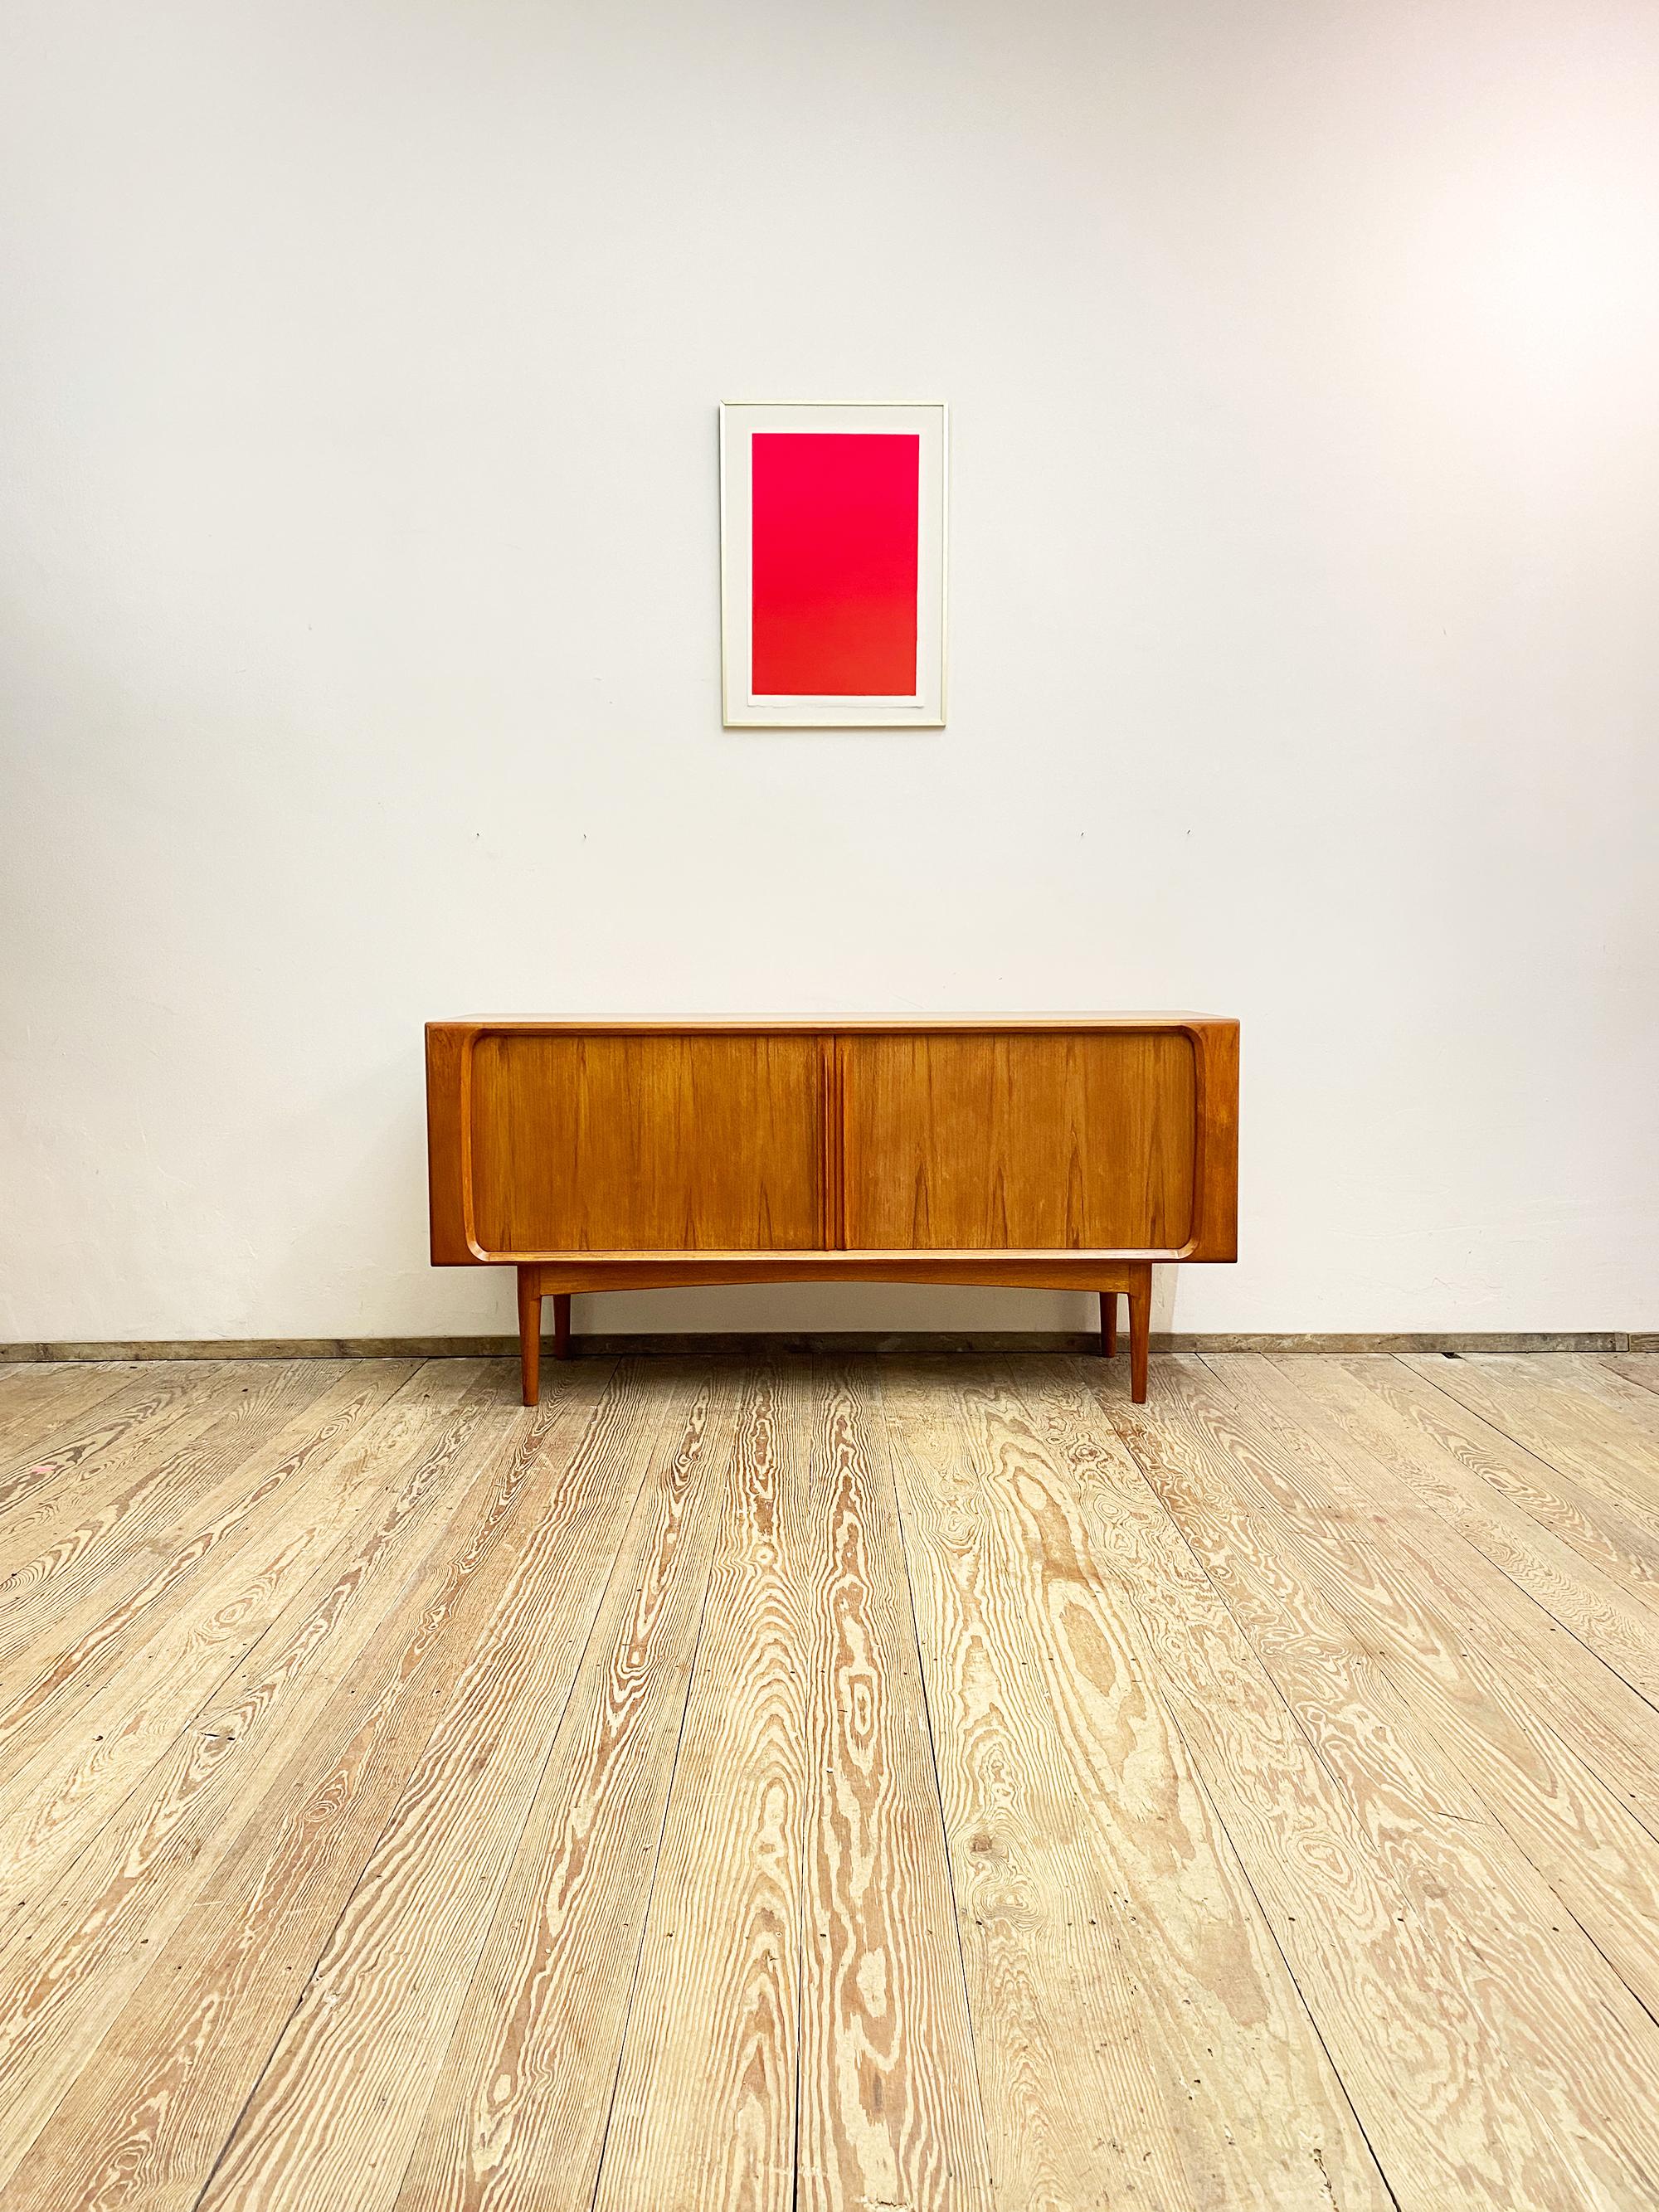 Dimensions: 160x50x80 cm (width x depth x height)

This beautiful sideboard was designed by Bernhard Pedersen in the 60s in Denmark. The sideboard comes with tambour door that slide to the sides and hide two big compartments with shelfs and three